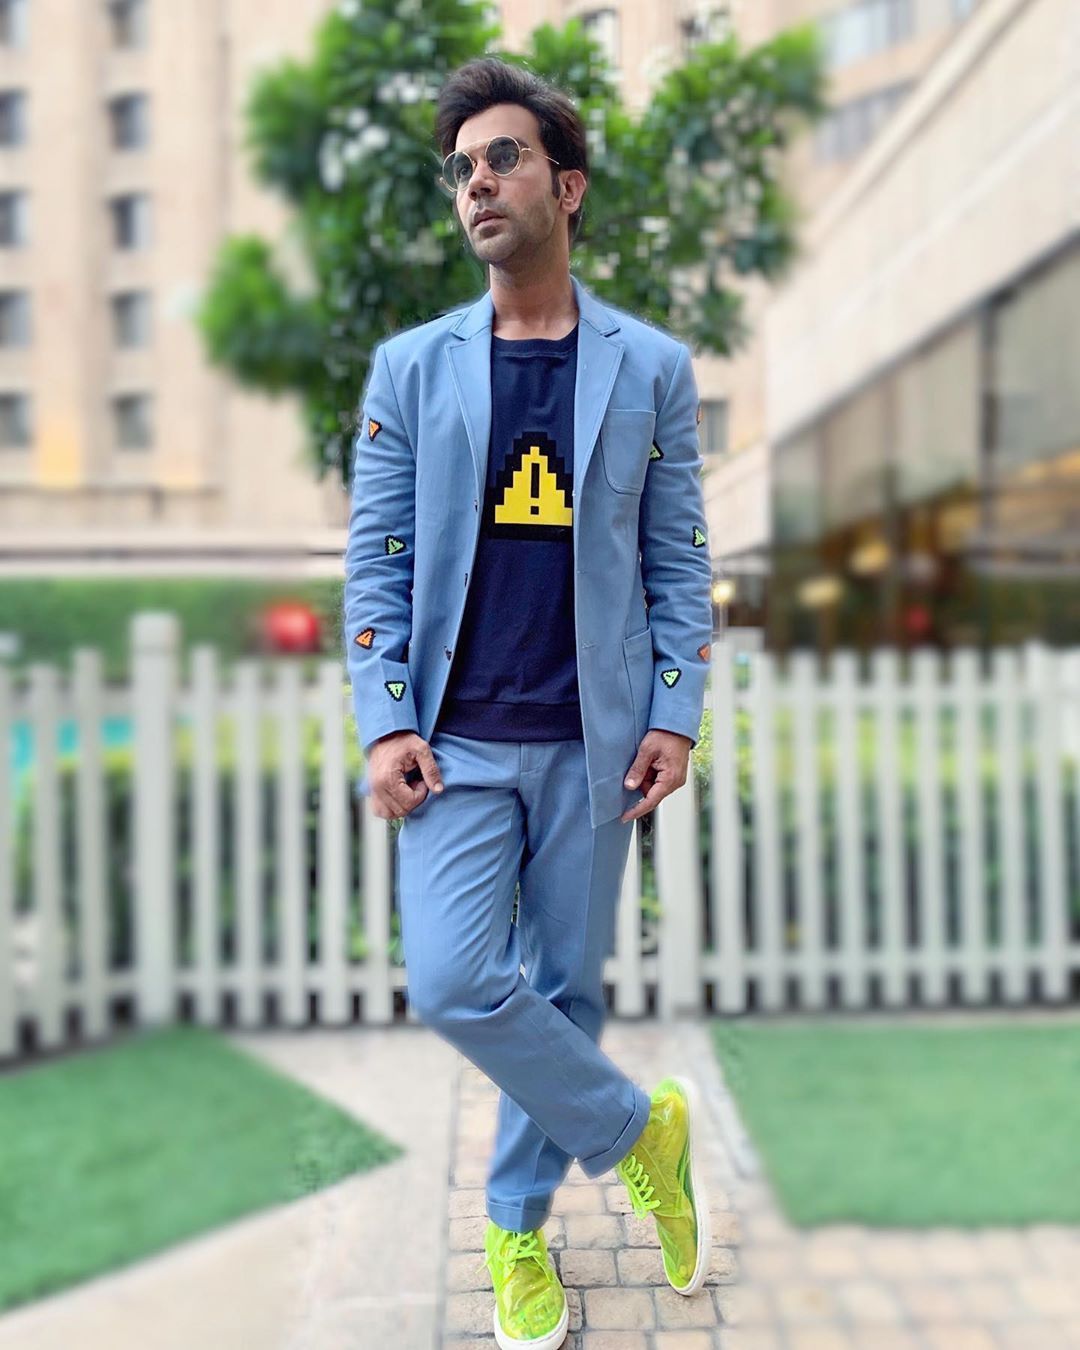 Rajkummar Rao Says He Would Choose This Actor To Have A Same Sex Relationship! Patralekha Are You Listening?